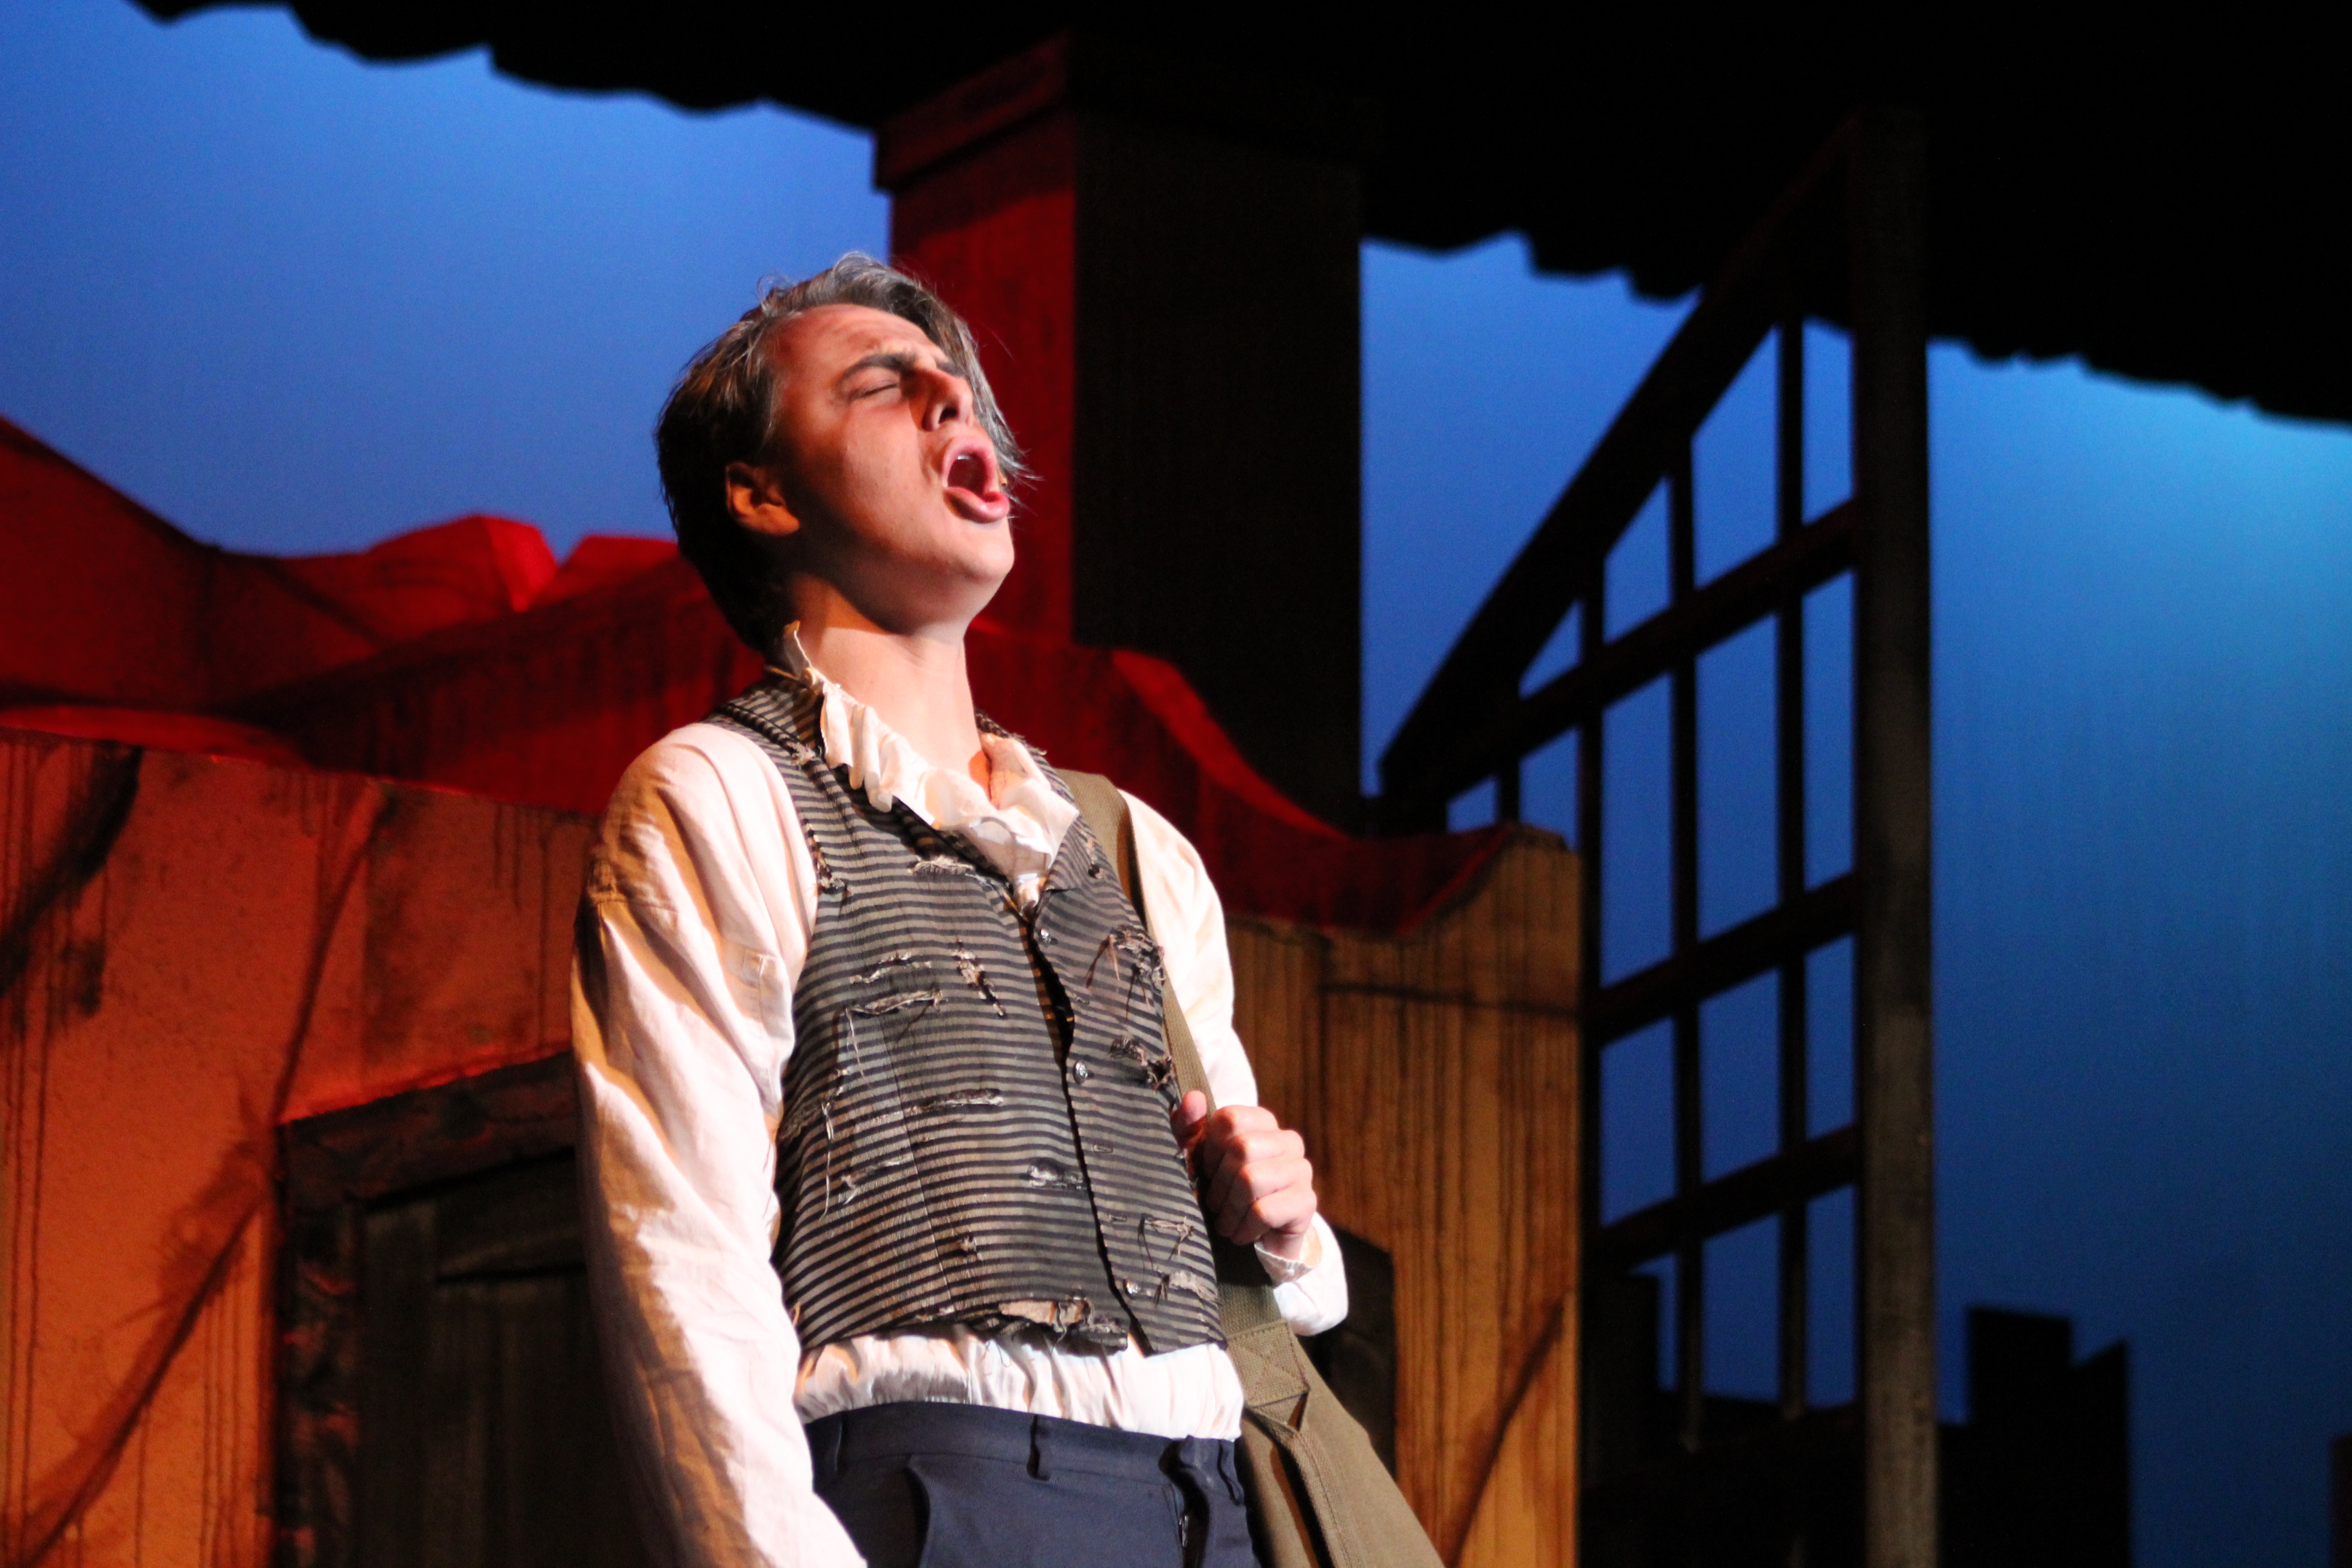 “Sweeney Todd” was performed by Aragon students from Nov. 15-18.